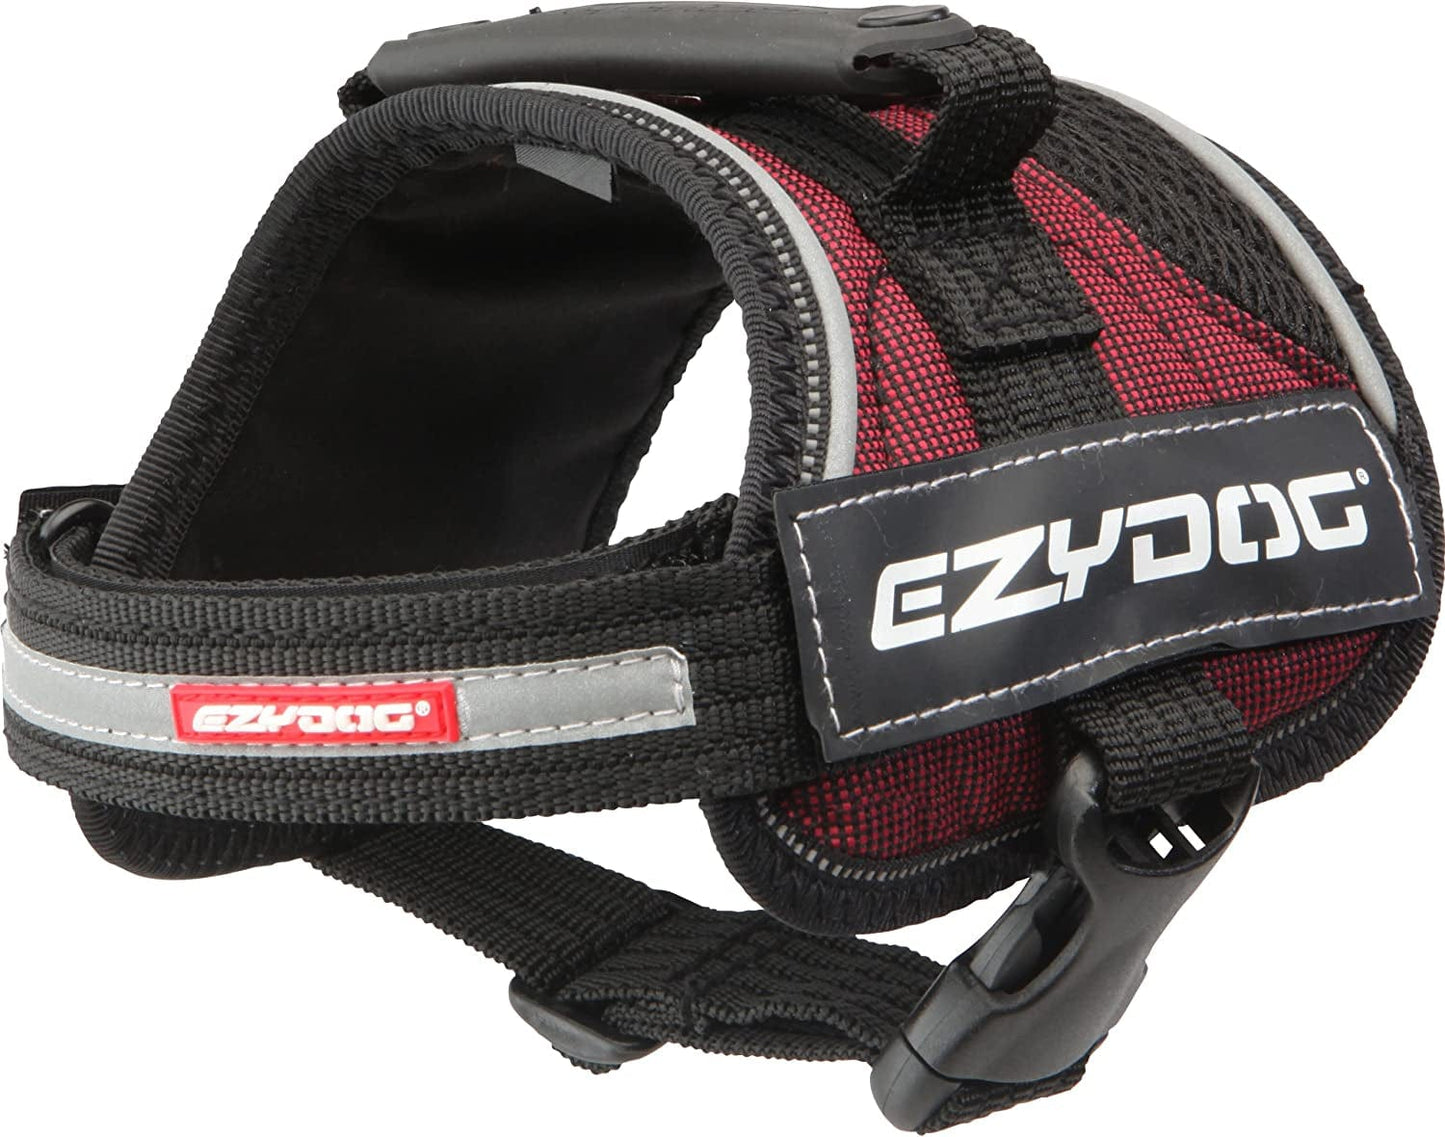 Ezydog Convert Trail-Ready Outdoor Adjustable Dog Harness - Perfect for Hiking, Walking, and Doubles as a Service Dog Vest - Superior Comfort Design with a Durable Traffic Handle (X-Small, Charcoal) Animals & Pet Supplies > Pet Supplies > Dog Supplies > Dog Apparel EzyDog, LLC Burgundy X-Small 